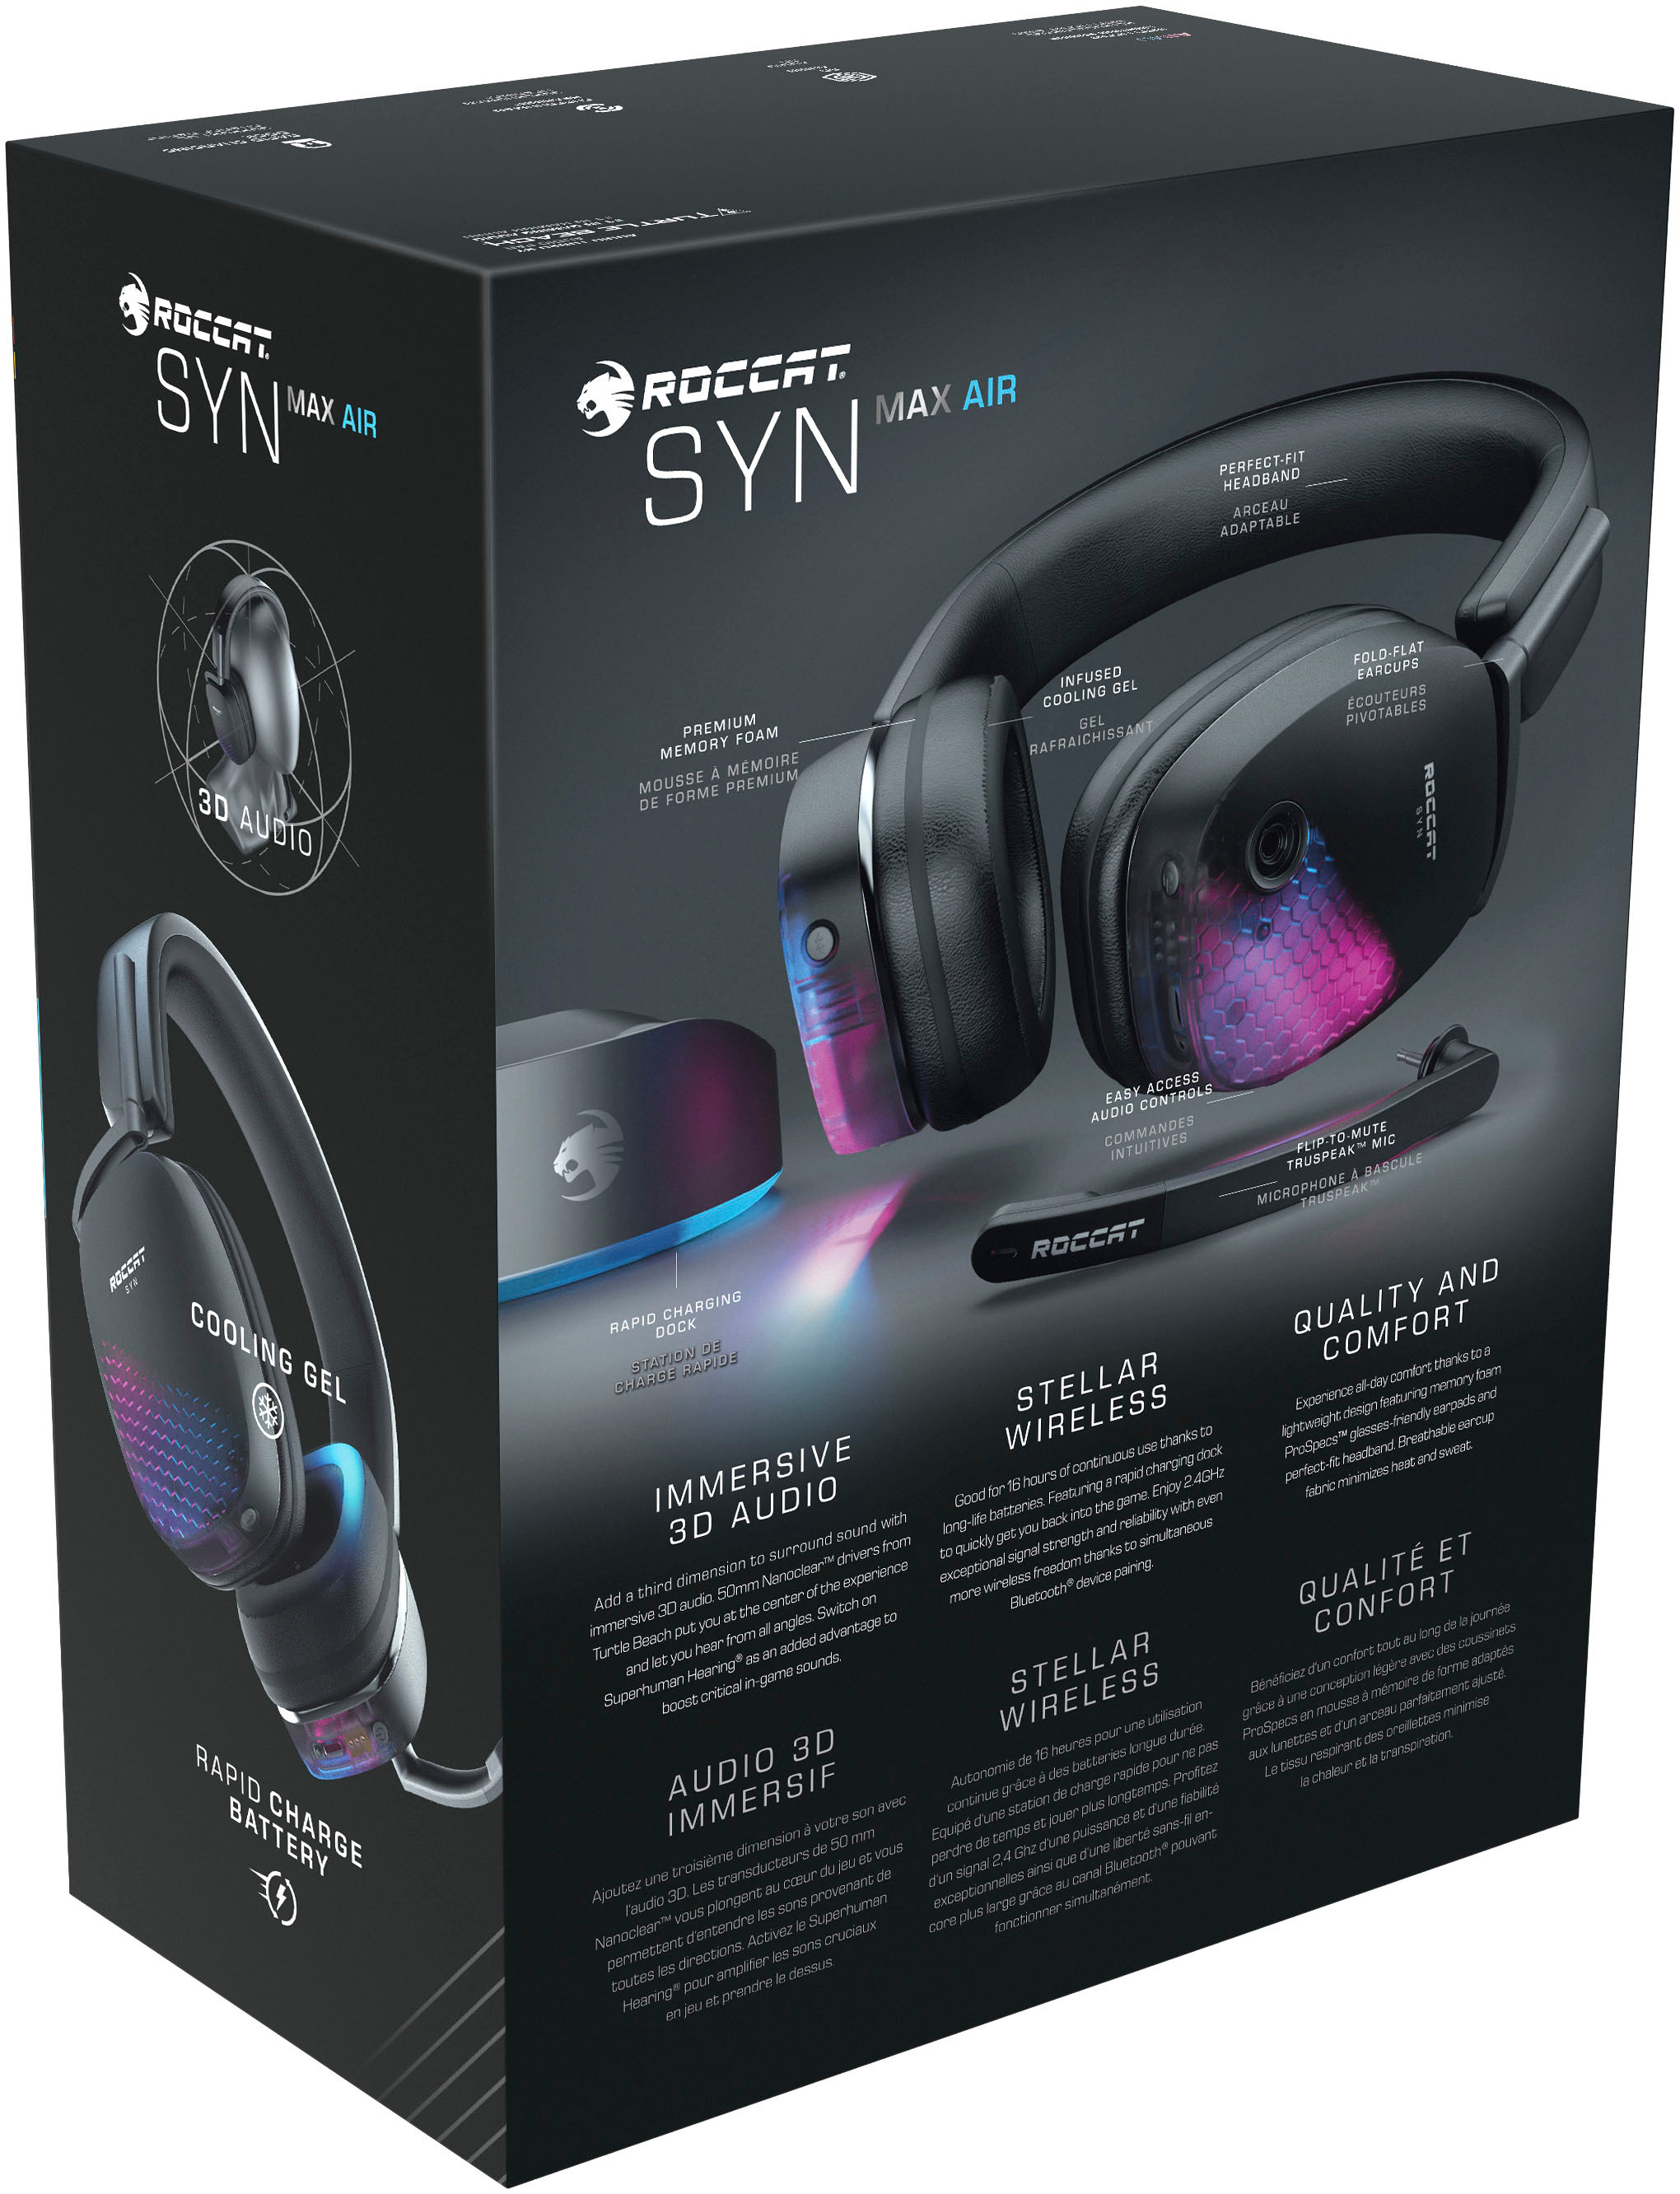 ROCCAT SYN Black - Headset Wireless Best for Air PC Gaming Buy ROC-14-155-01 Max